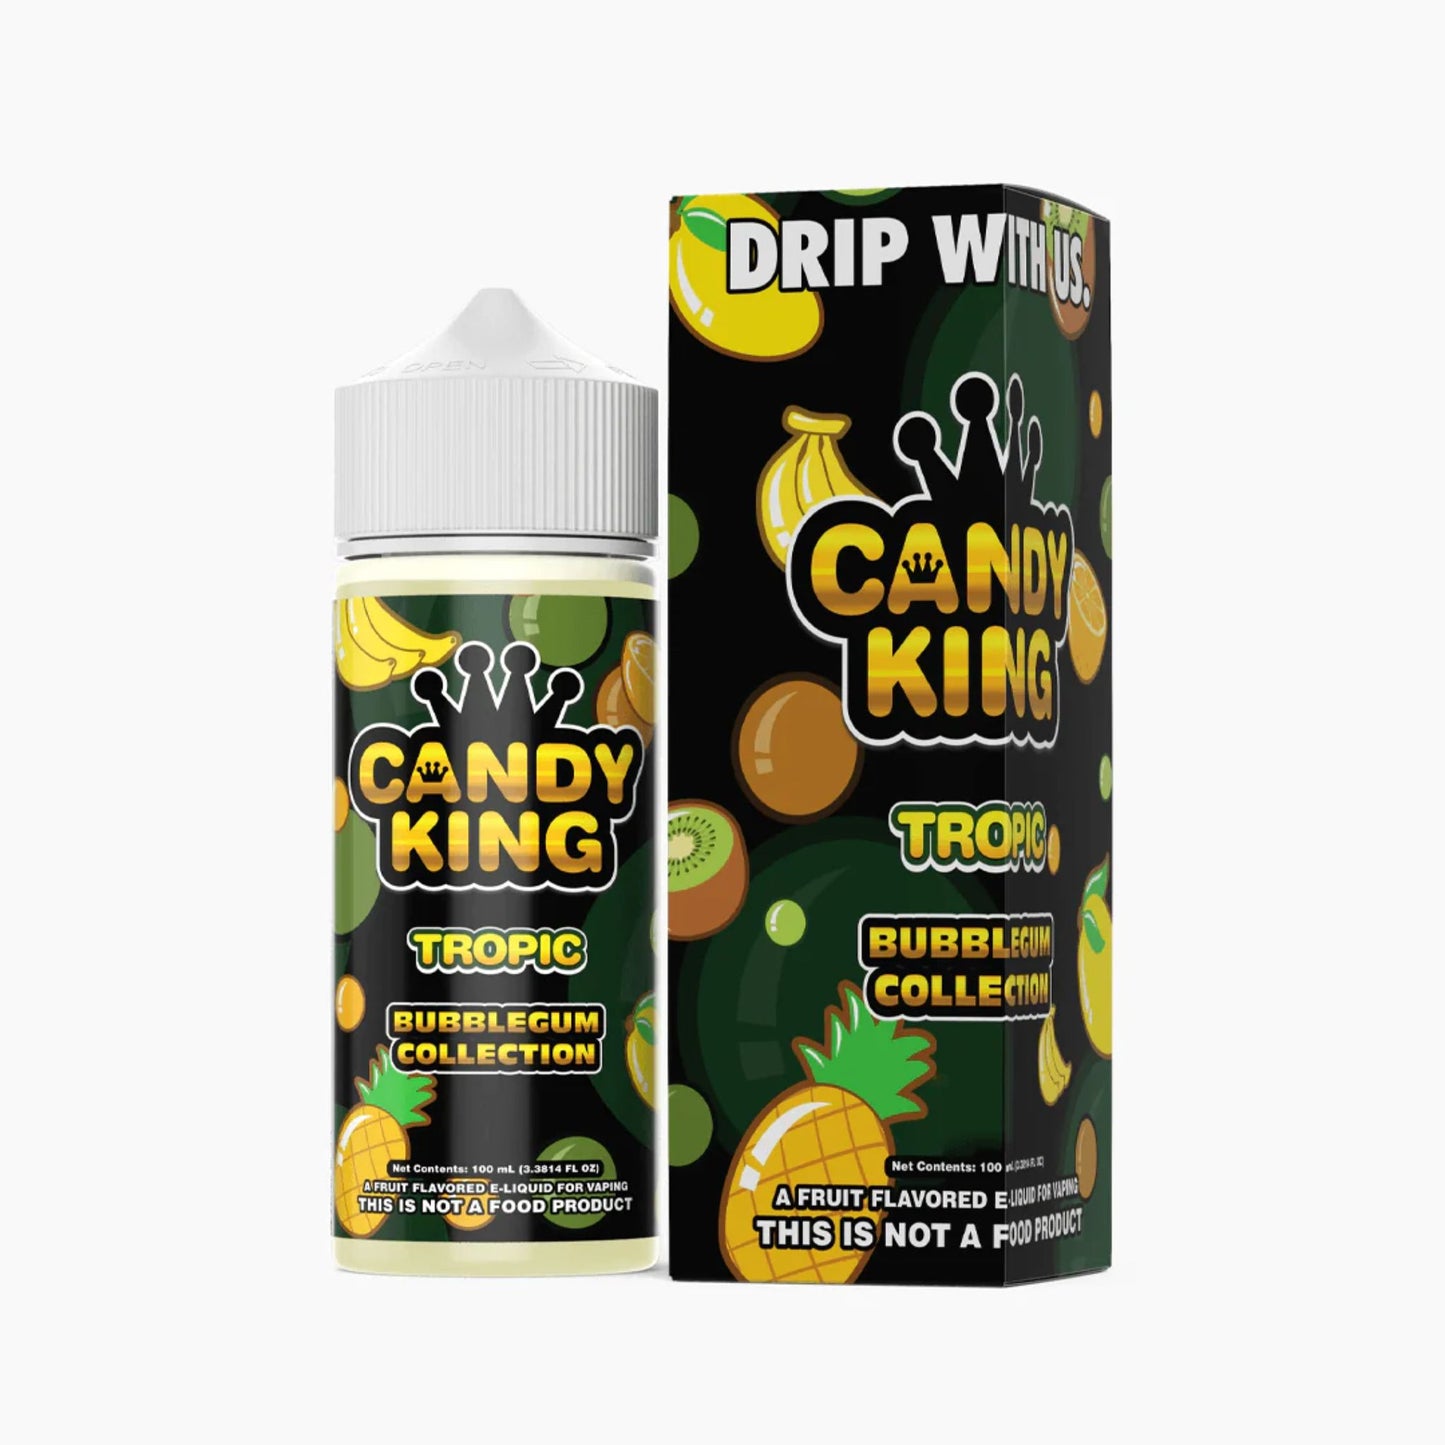 Candy King Bubblegum Collection | Tropic | 100ml bottle and box